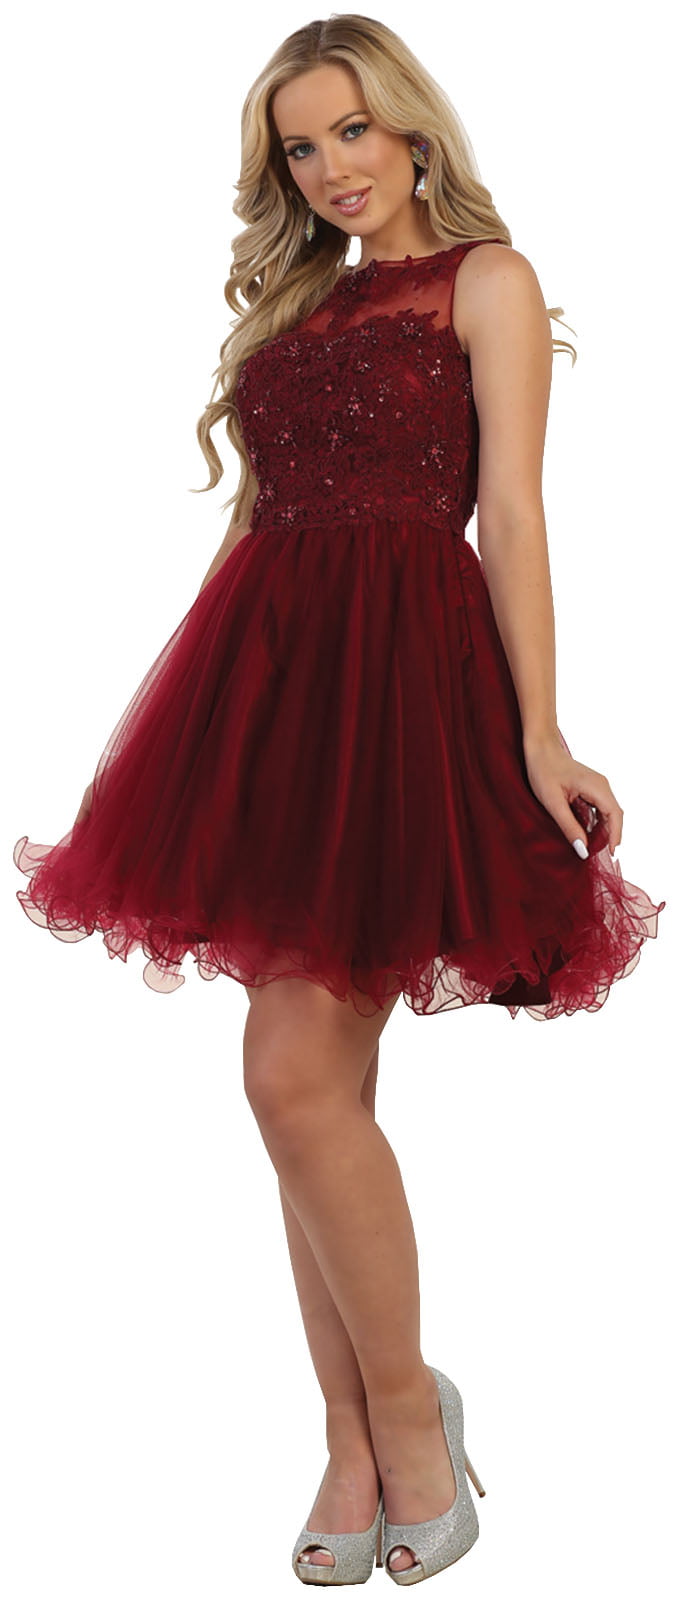 May Queen Cute Short Demure Party Dress And Plus Size